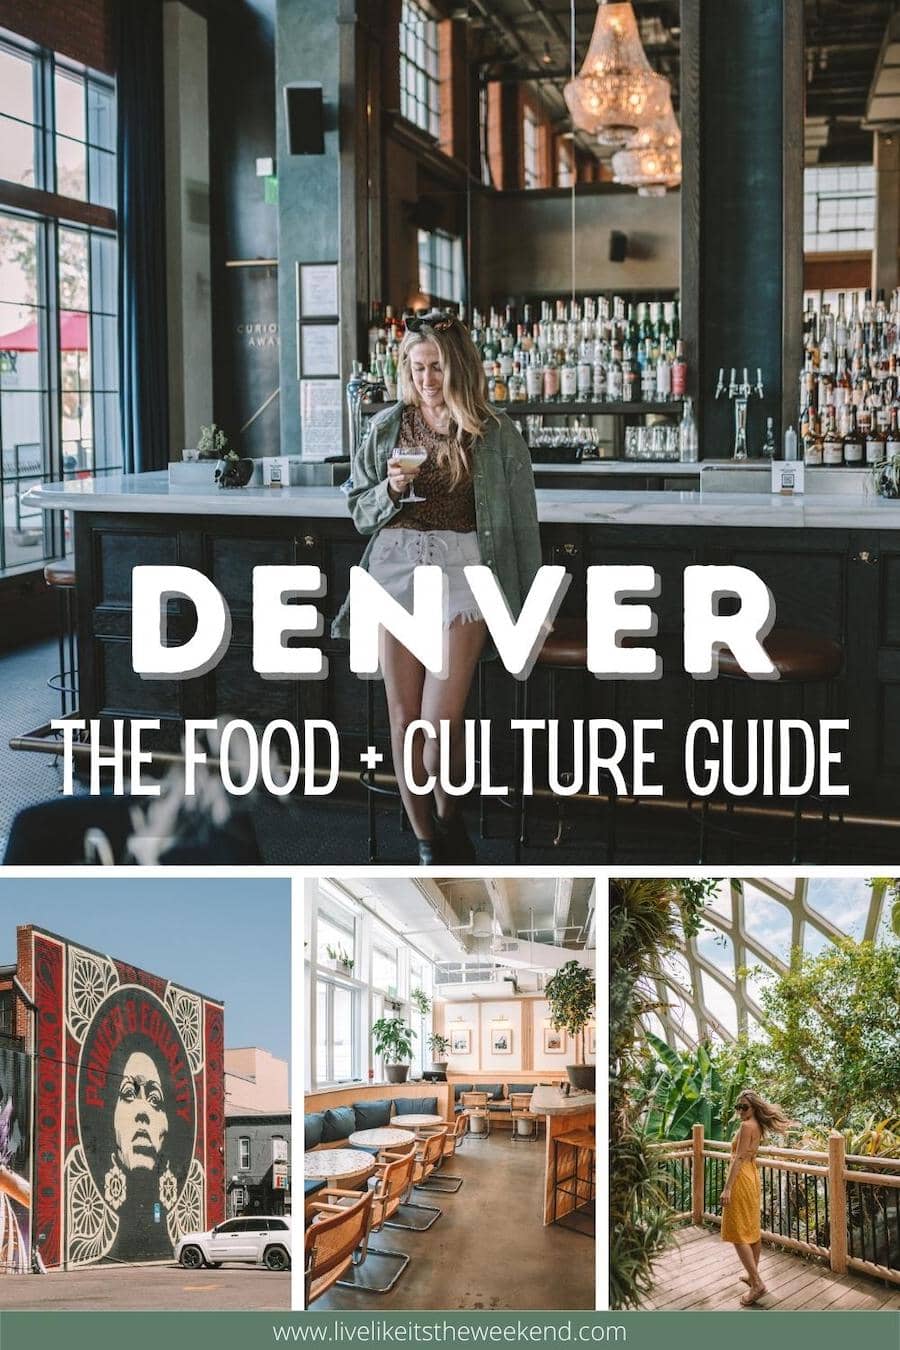 Weekend in Denver food and culture guide